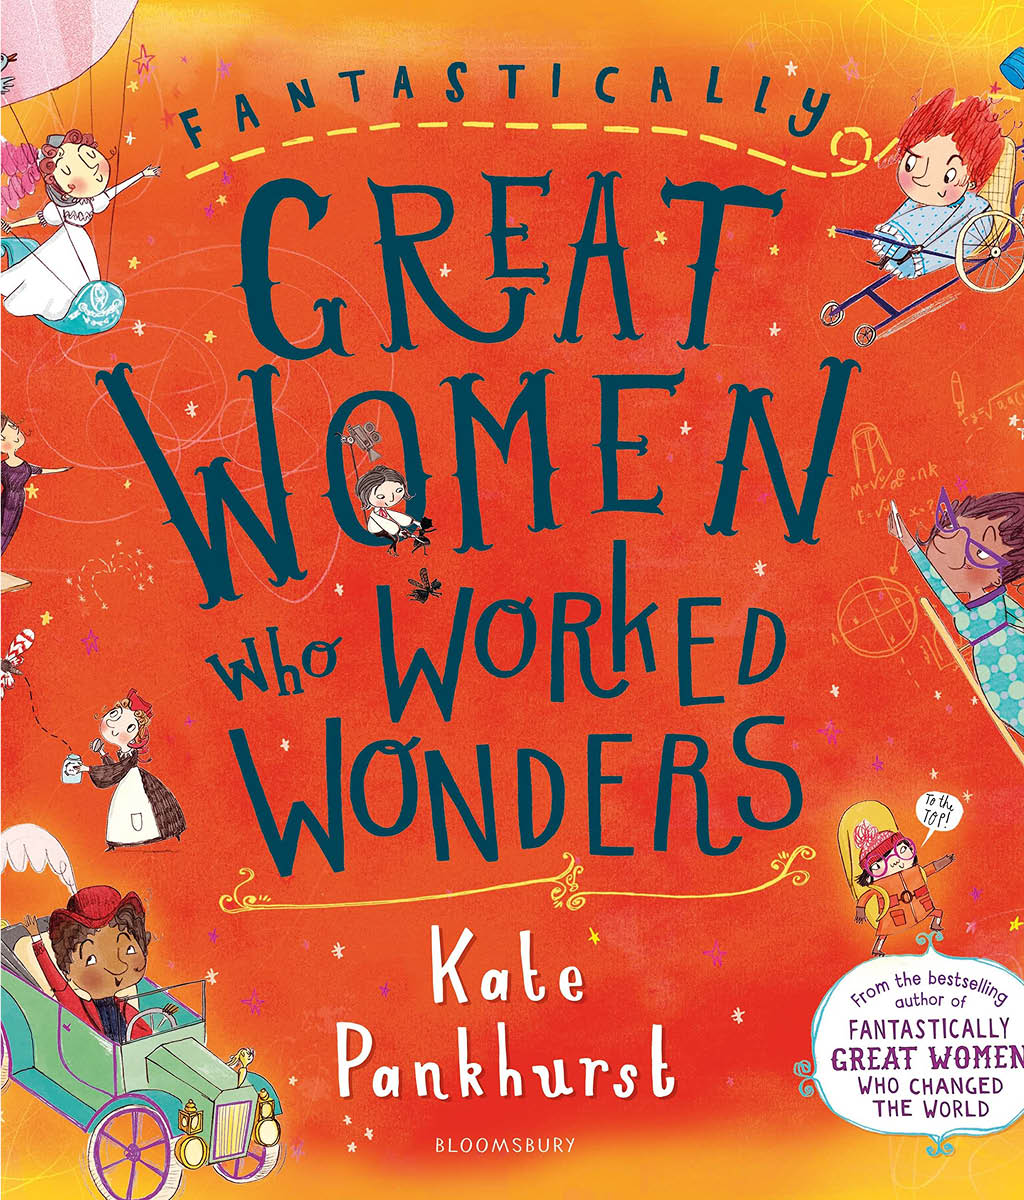 Fantastically Great Women Who Worked Wonders: Gift Edition by Kate Pankhurst